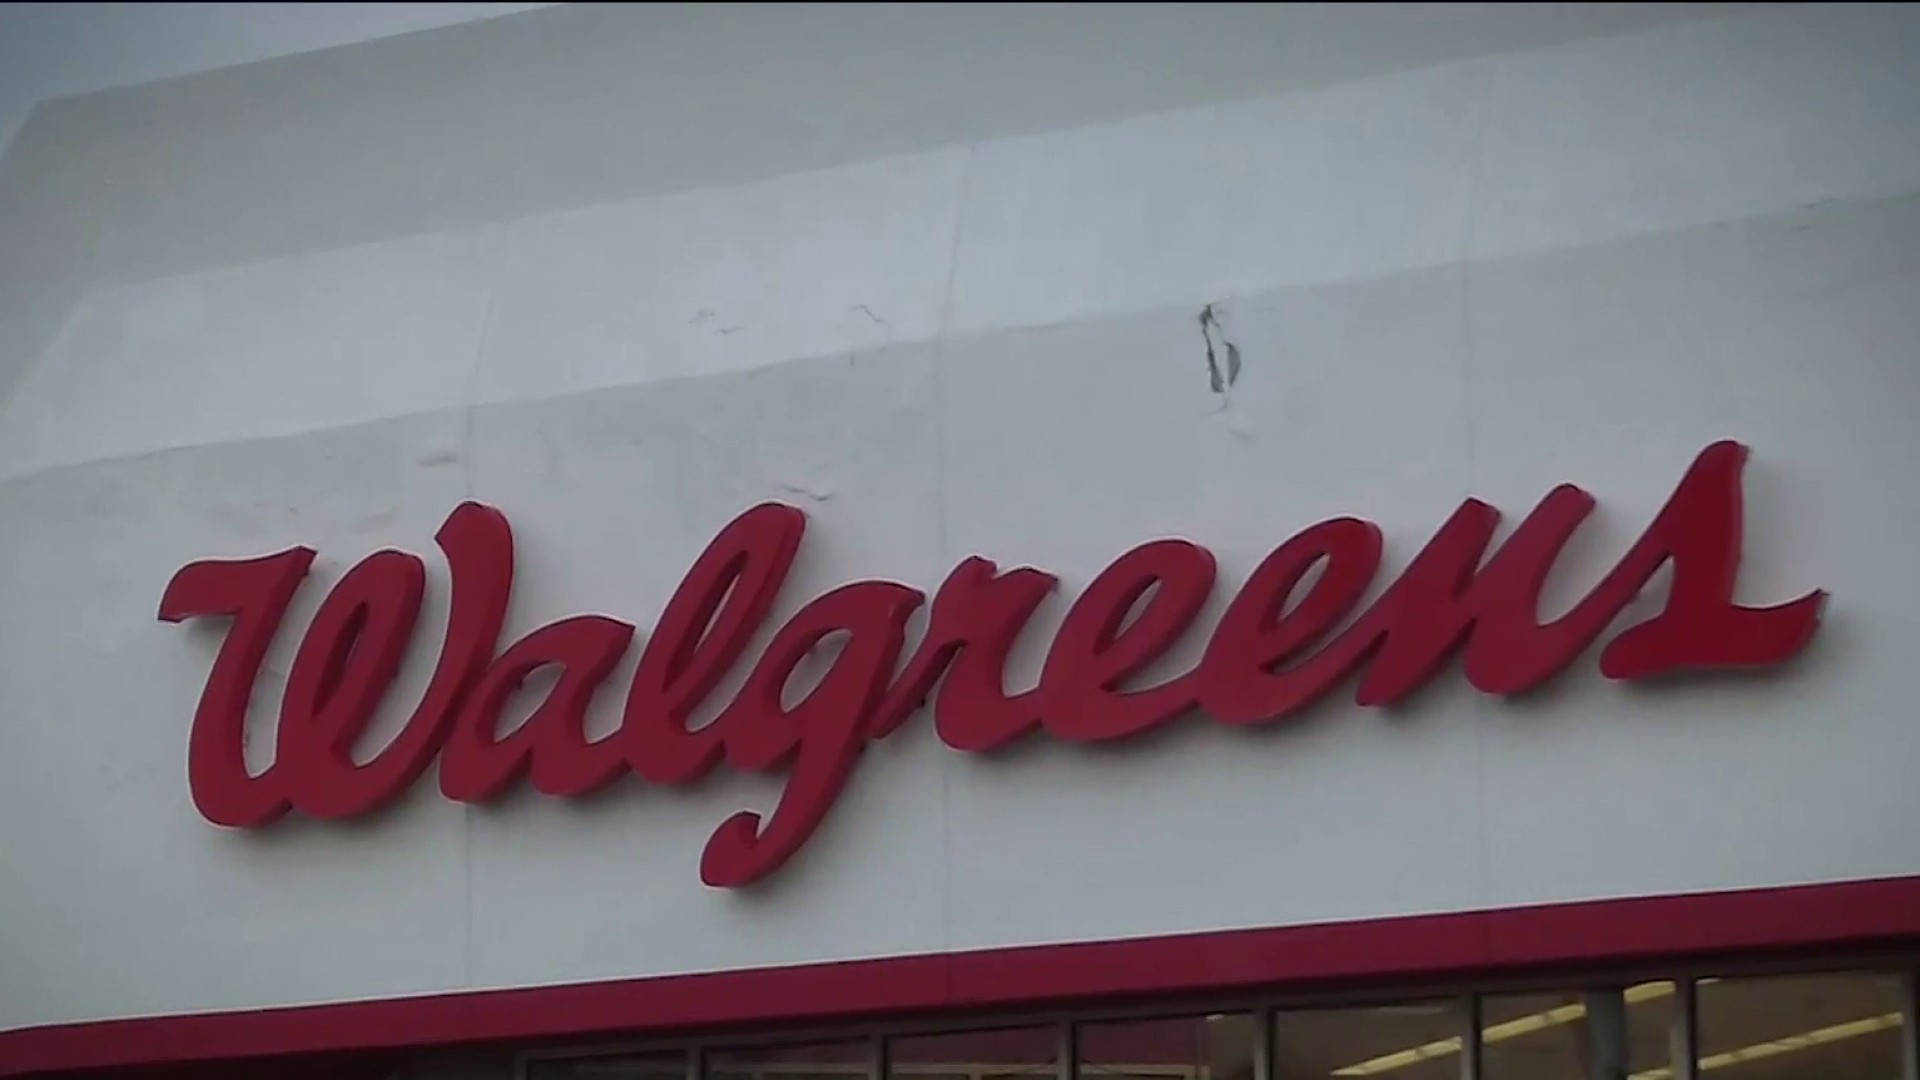 Walgreens Logo On White Concrete Wall Picture